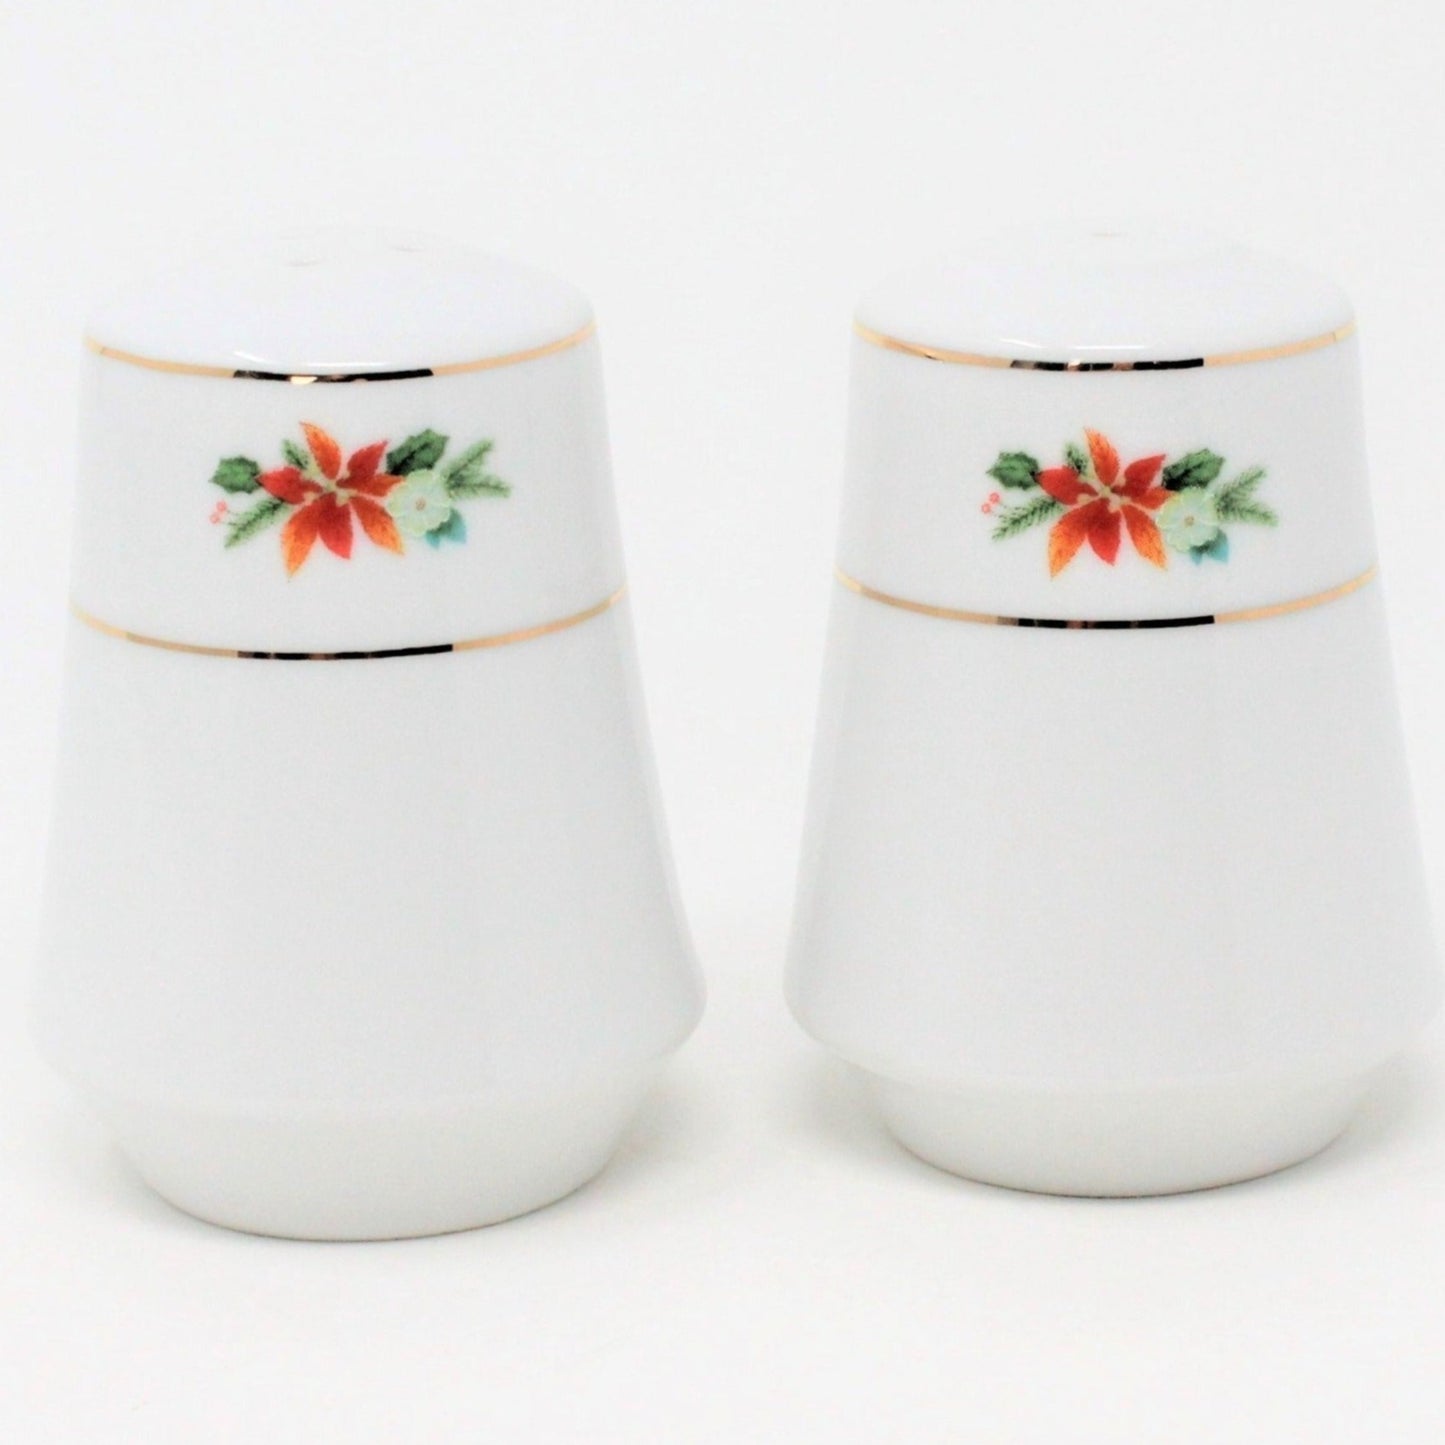 Salt and Pepper Shakers, Royal Norfolk, Poinsettia and Holly, RNF26 Porcelain, 2004